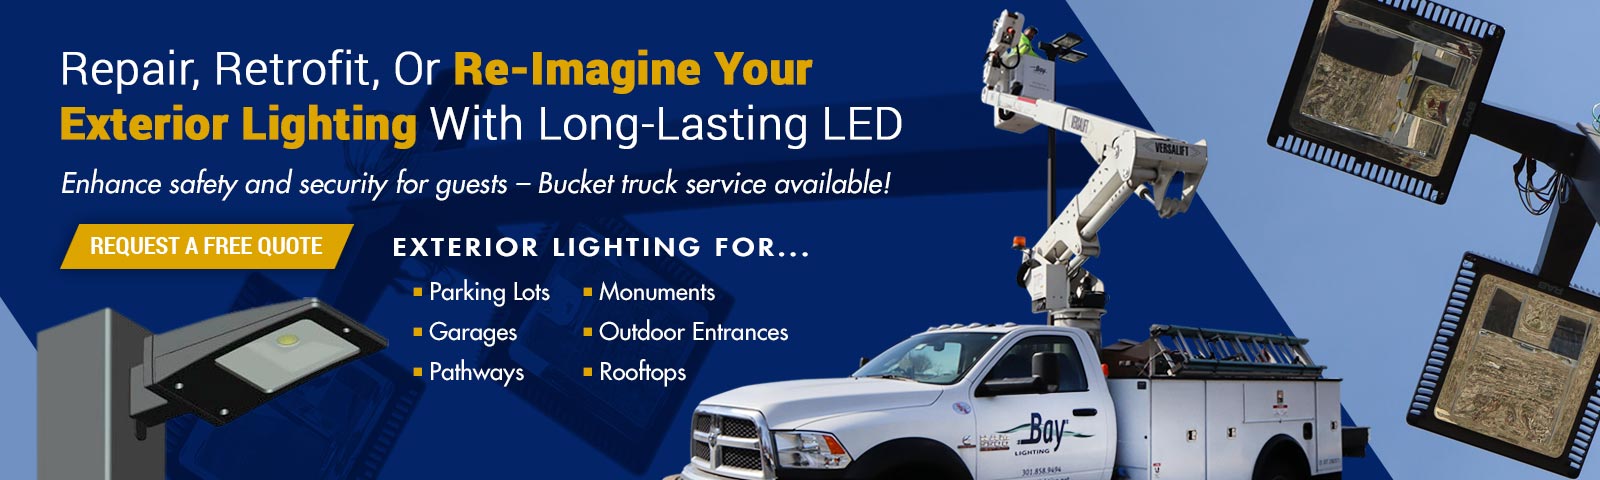 Re-imagine your exterior lighting with long-lasting LED from Bay Lighting